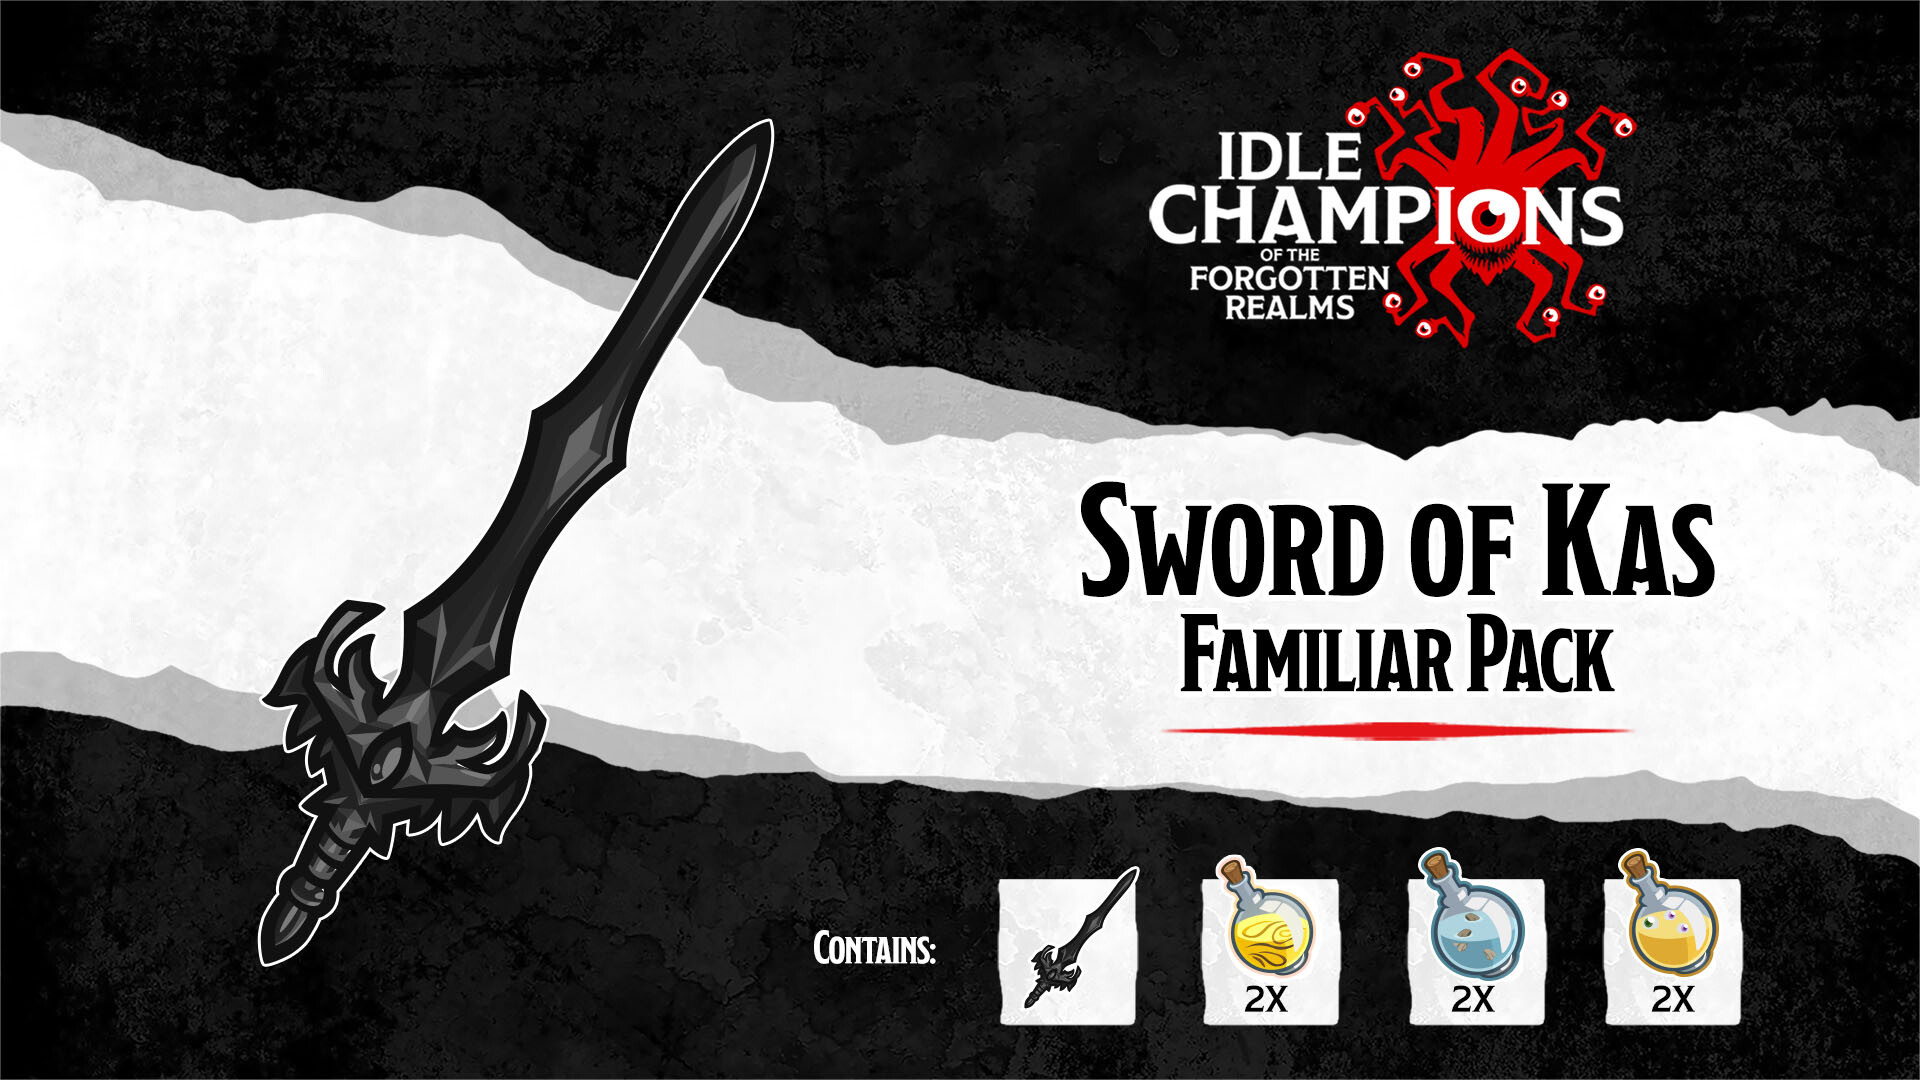 Idle Champions - Sword of Kas Familiar Pack Featured Screenshot #1